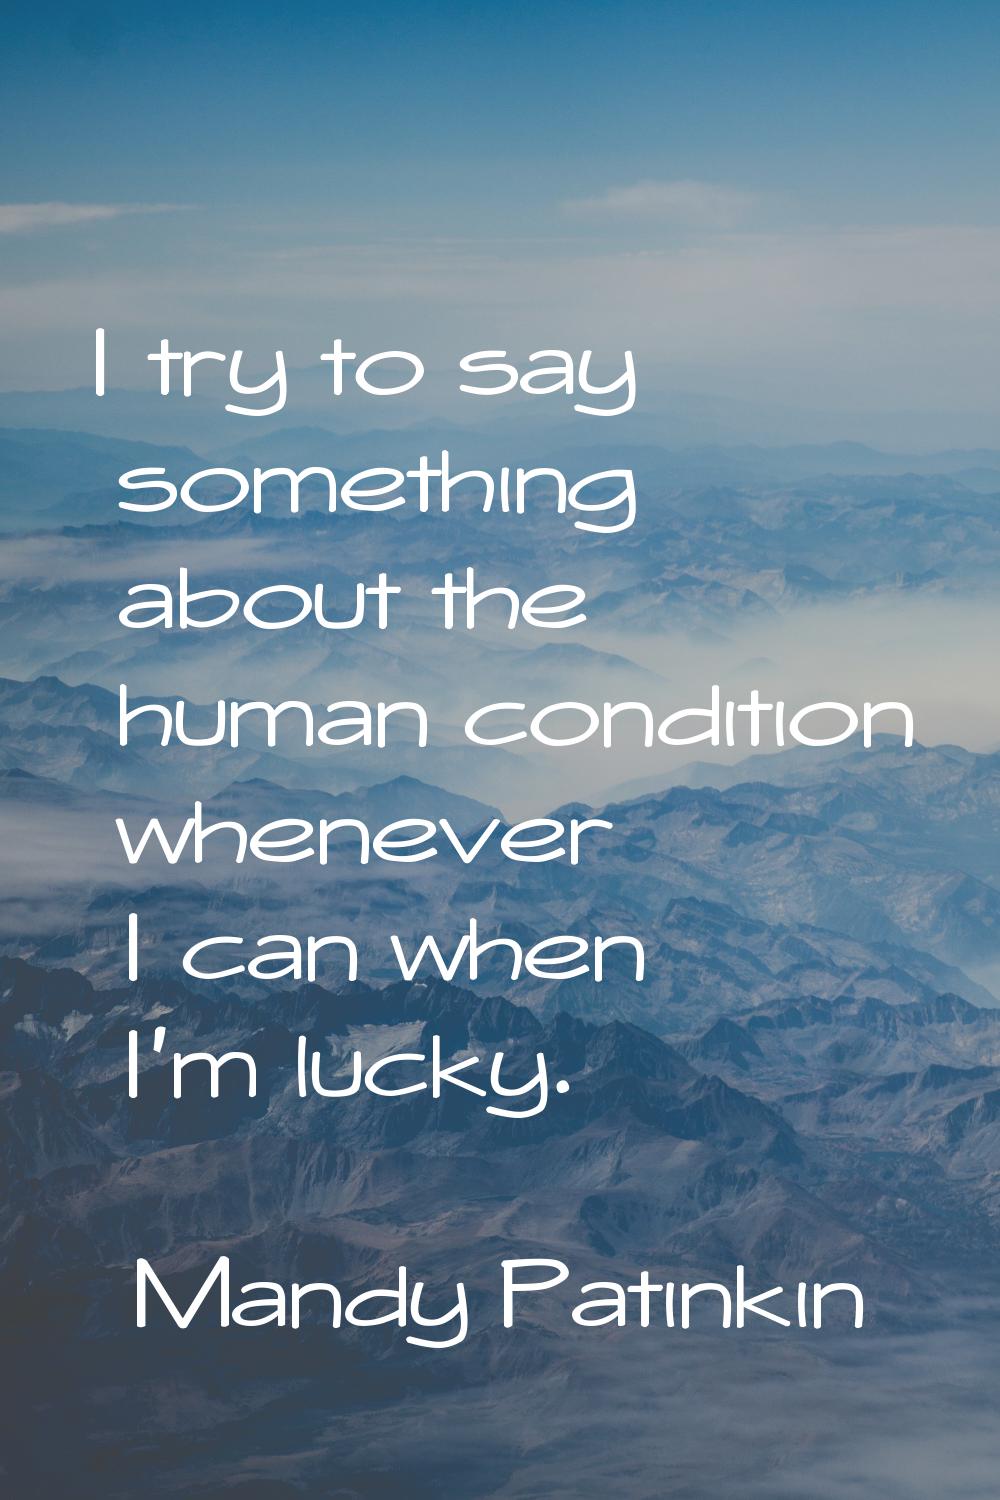 I try to say something about the human condition whenever I can when I'm lucky.